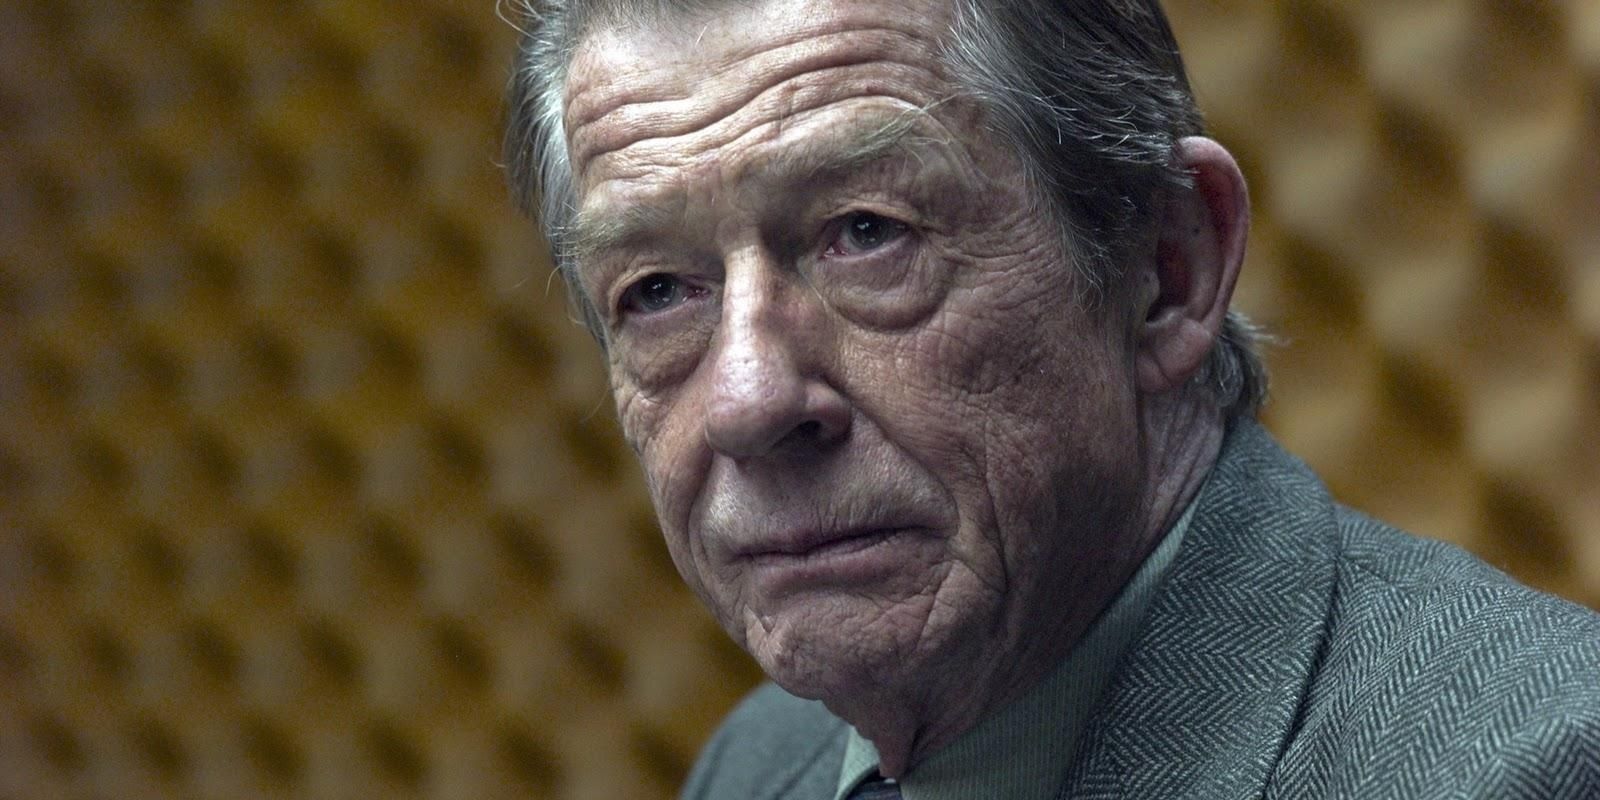 Contact (John Hurt) smiling in Tinker Tailor Soldier Spy